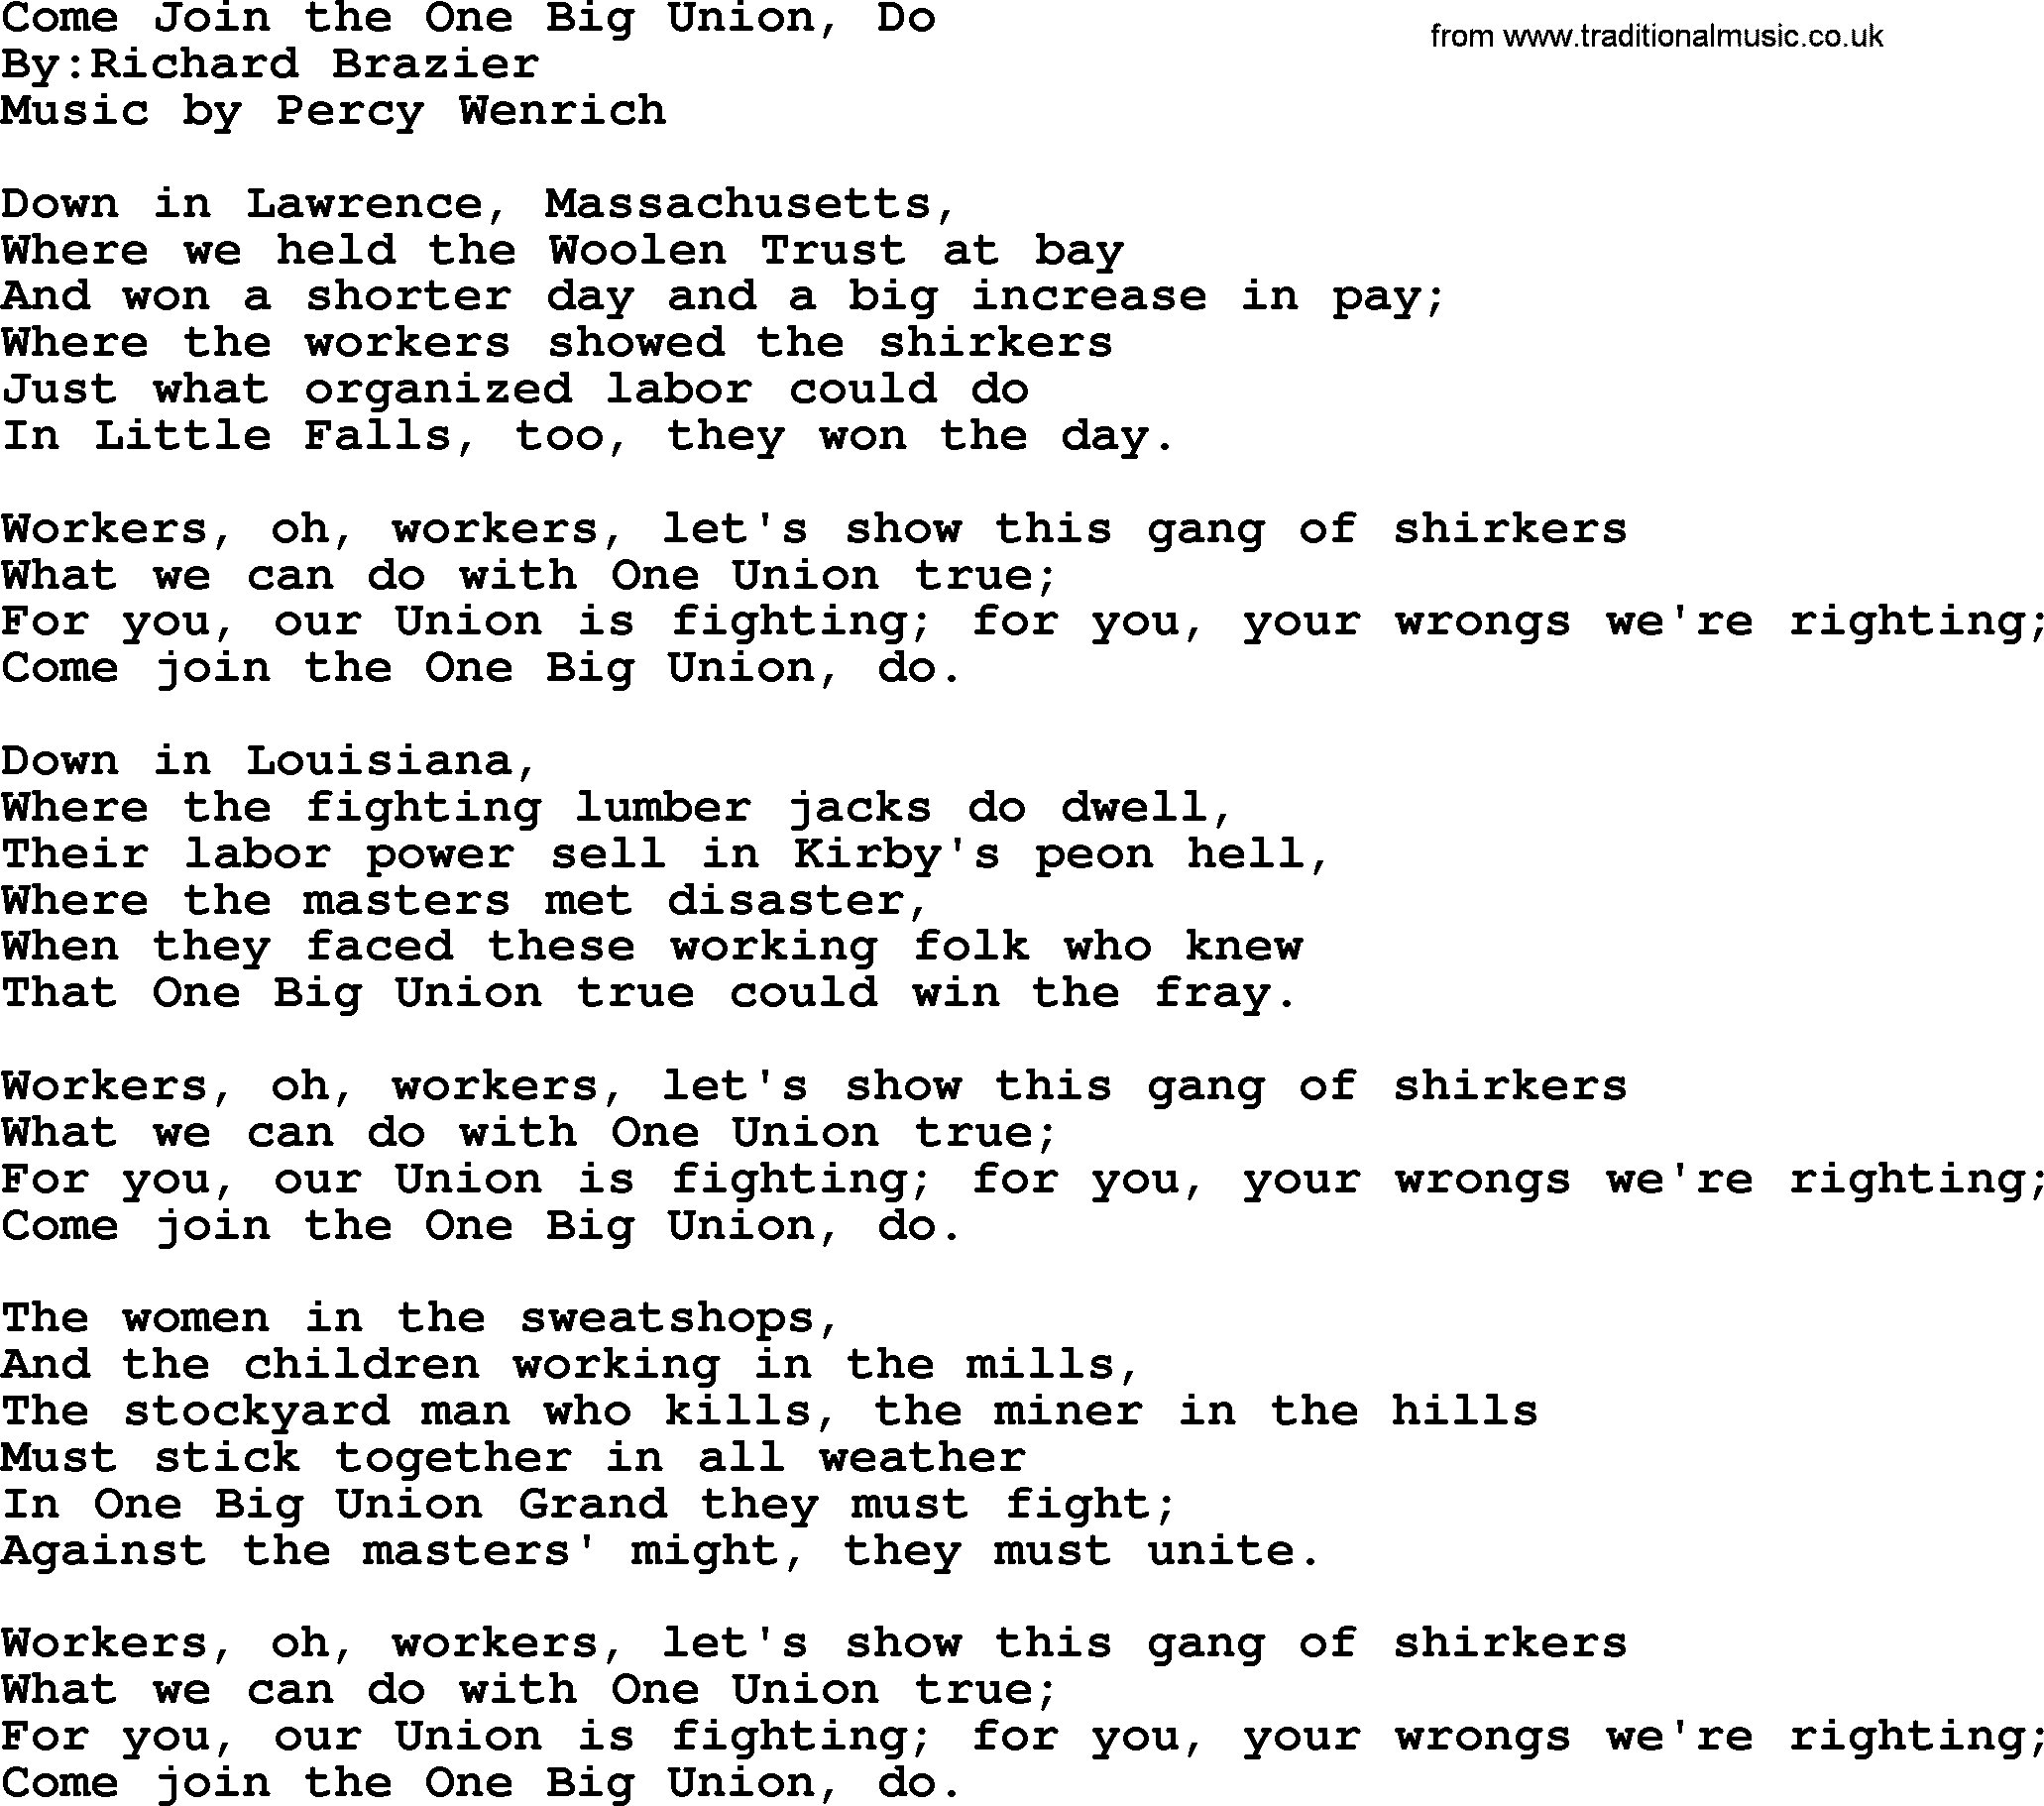 Political, Solidarity, Workers or Union song: Come Join The One Big Union Do, lyrics